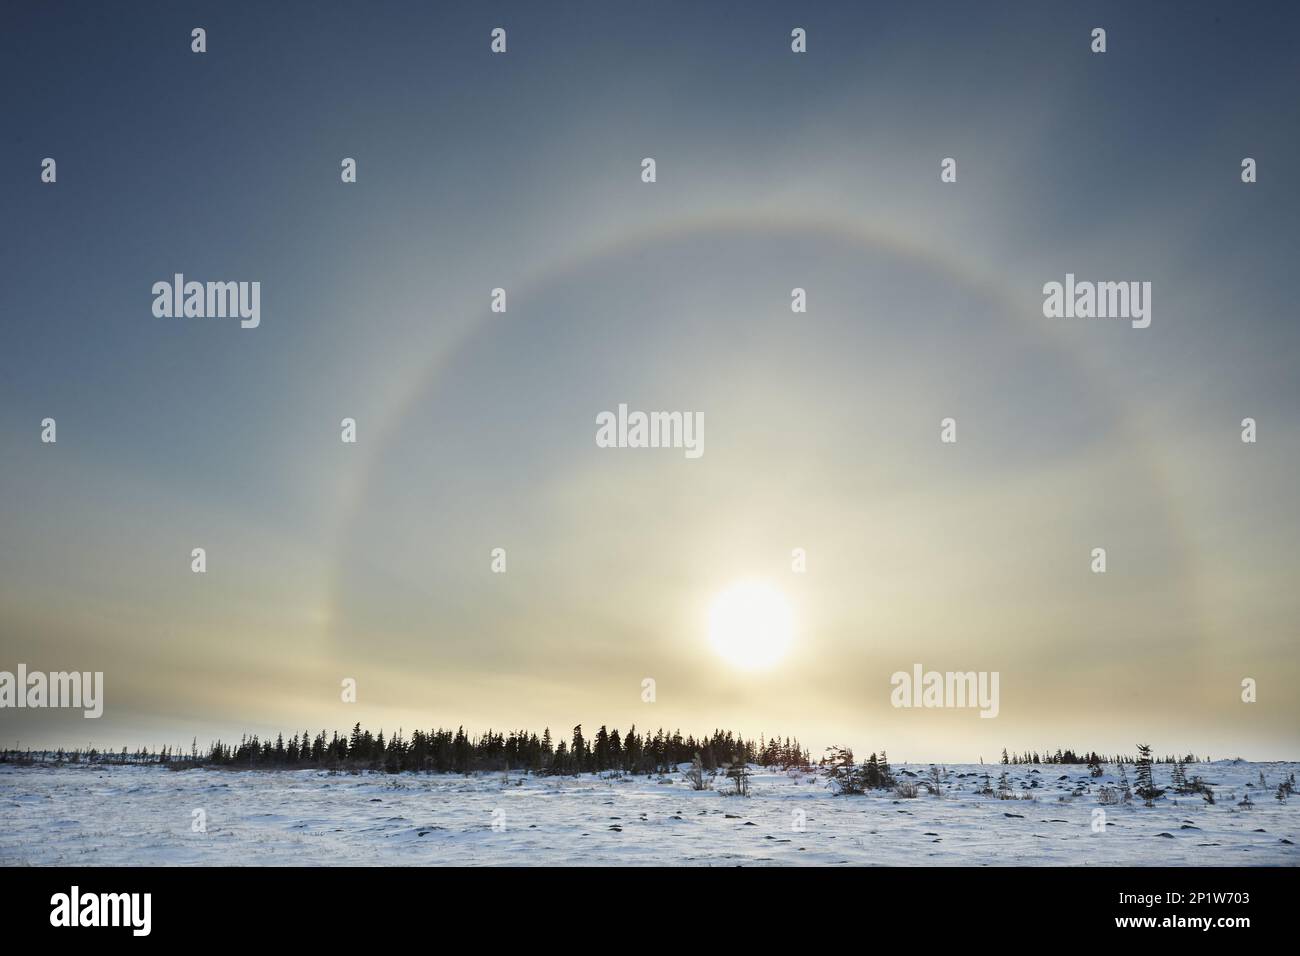 Atmospheric phenomenon sun dog caused by the interaction of light with ice crystals in the atmosphere, Manitoba, Canada Stock Photo